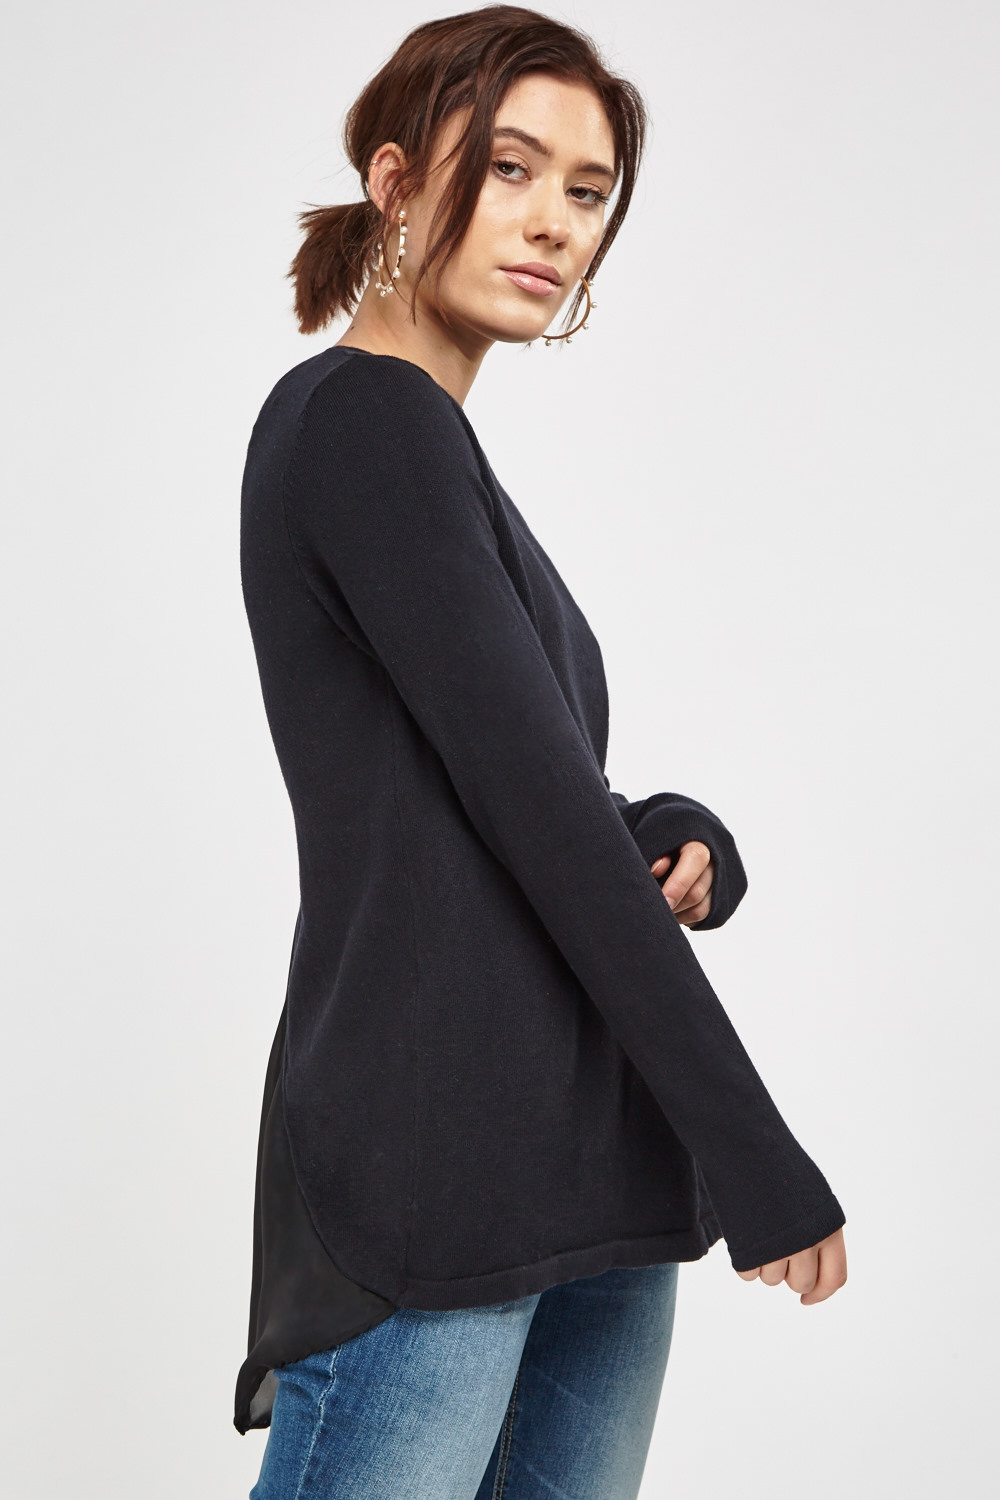 Contrast Long Sleeve Knitted Top - Just $7